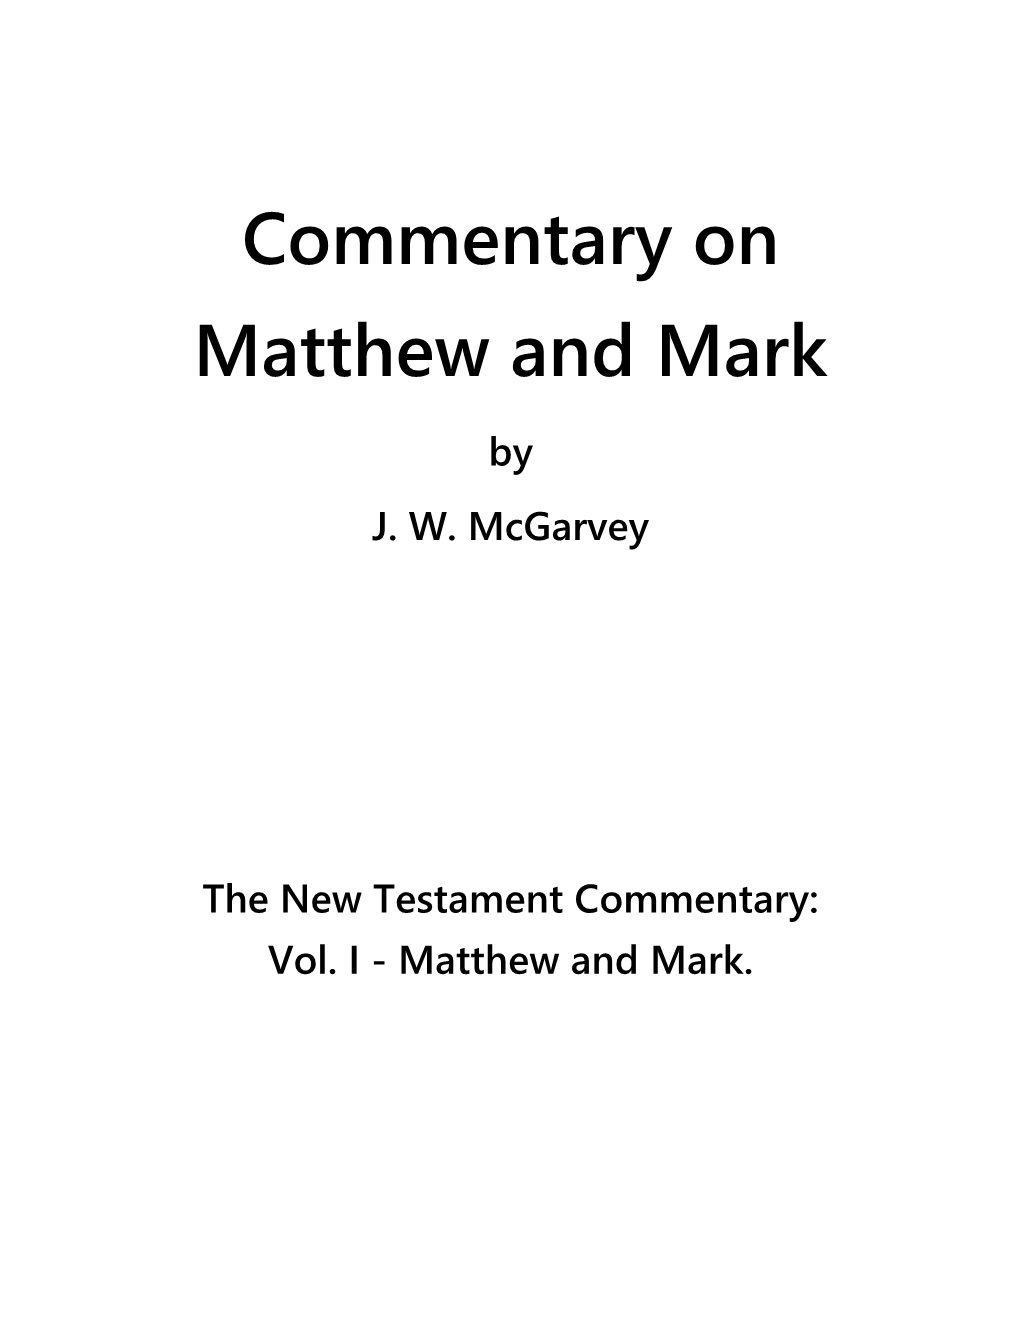 Commentary on Matthew and Mark